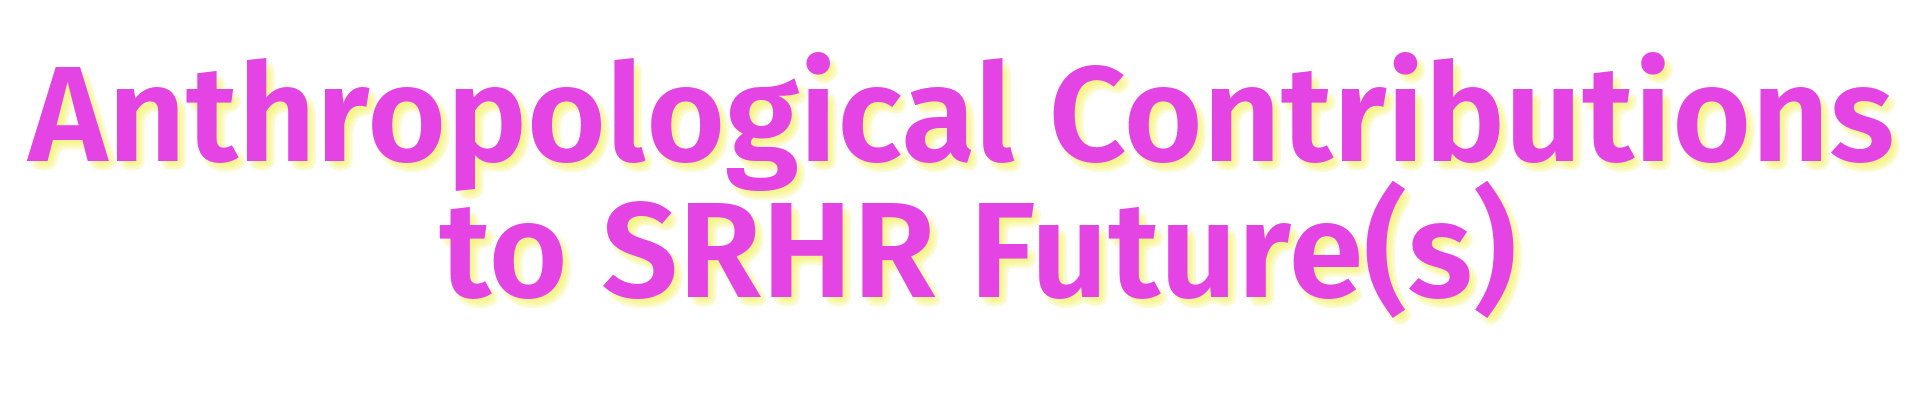 Anthropological Contributions to SRHR Futures